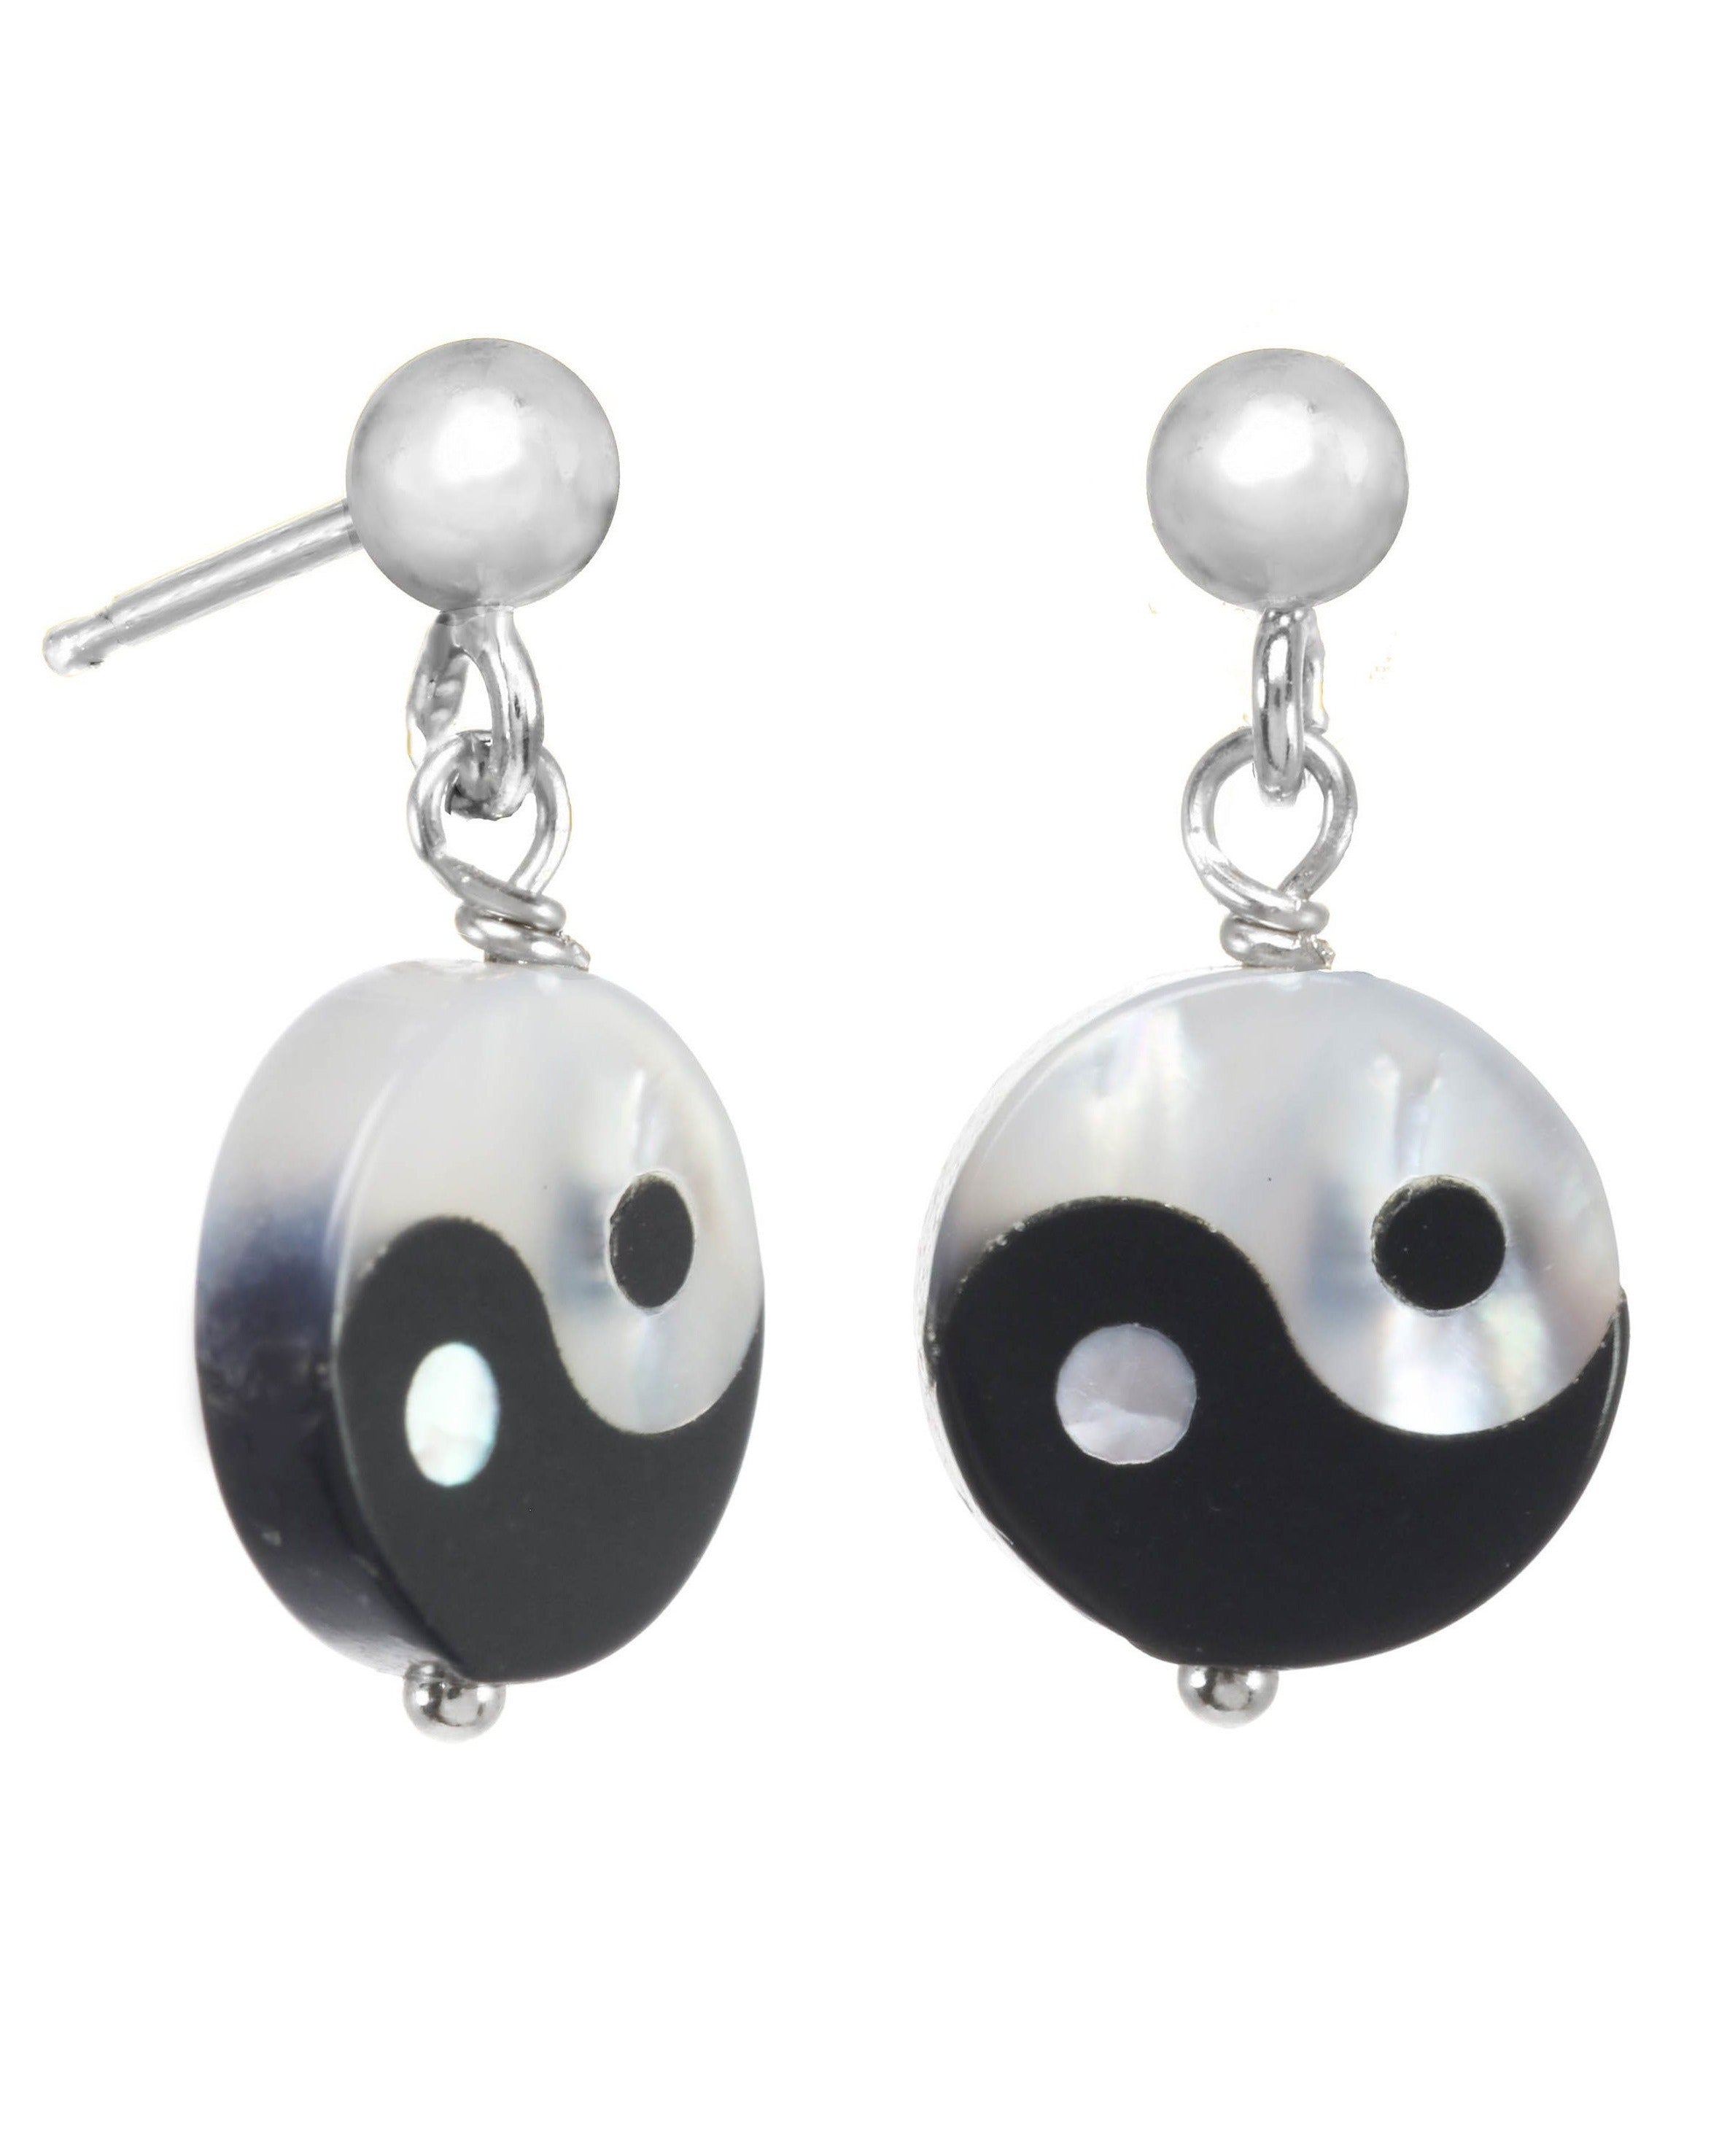 Yin Yang Earrings by KOZAKH. 3mm Ball stud earrings with 0.5 inch drop length, crafted in Sterling Silver, featuring a hand carved Mother of Pearl Yin Yang charm.